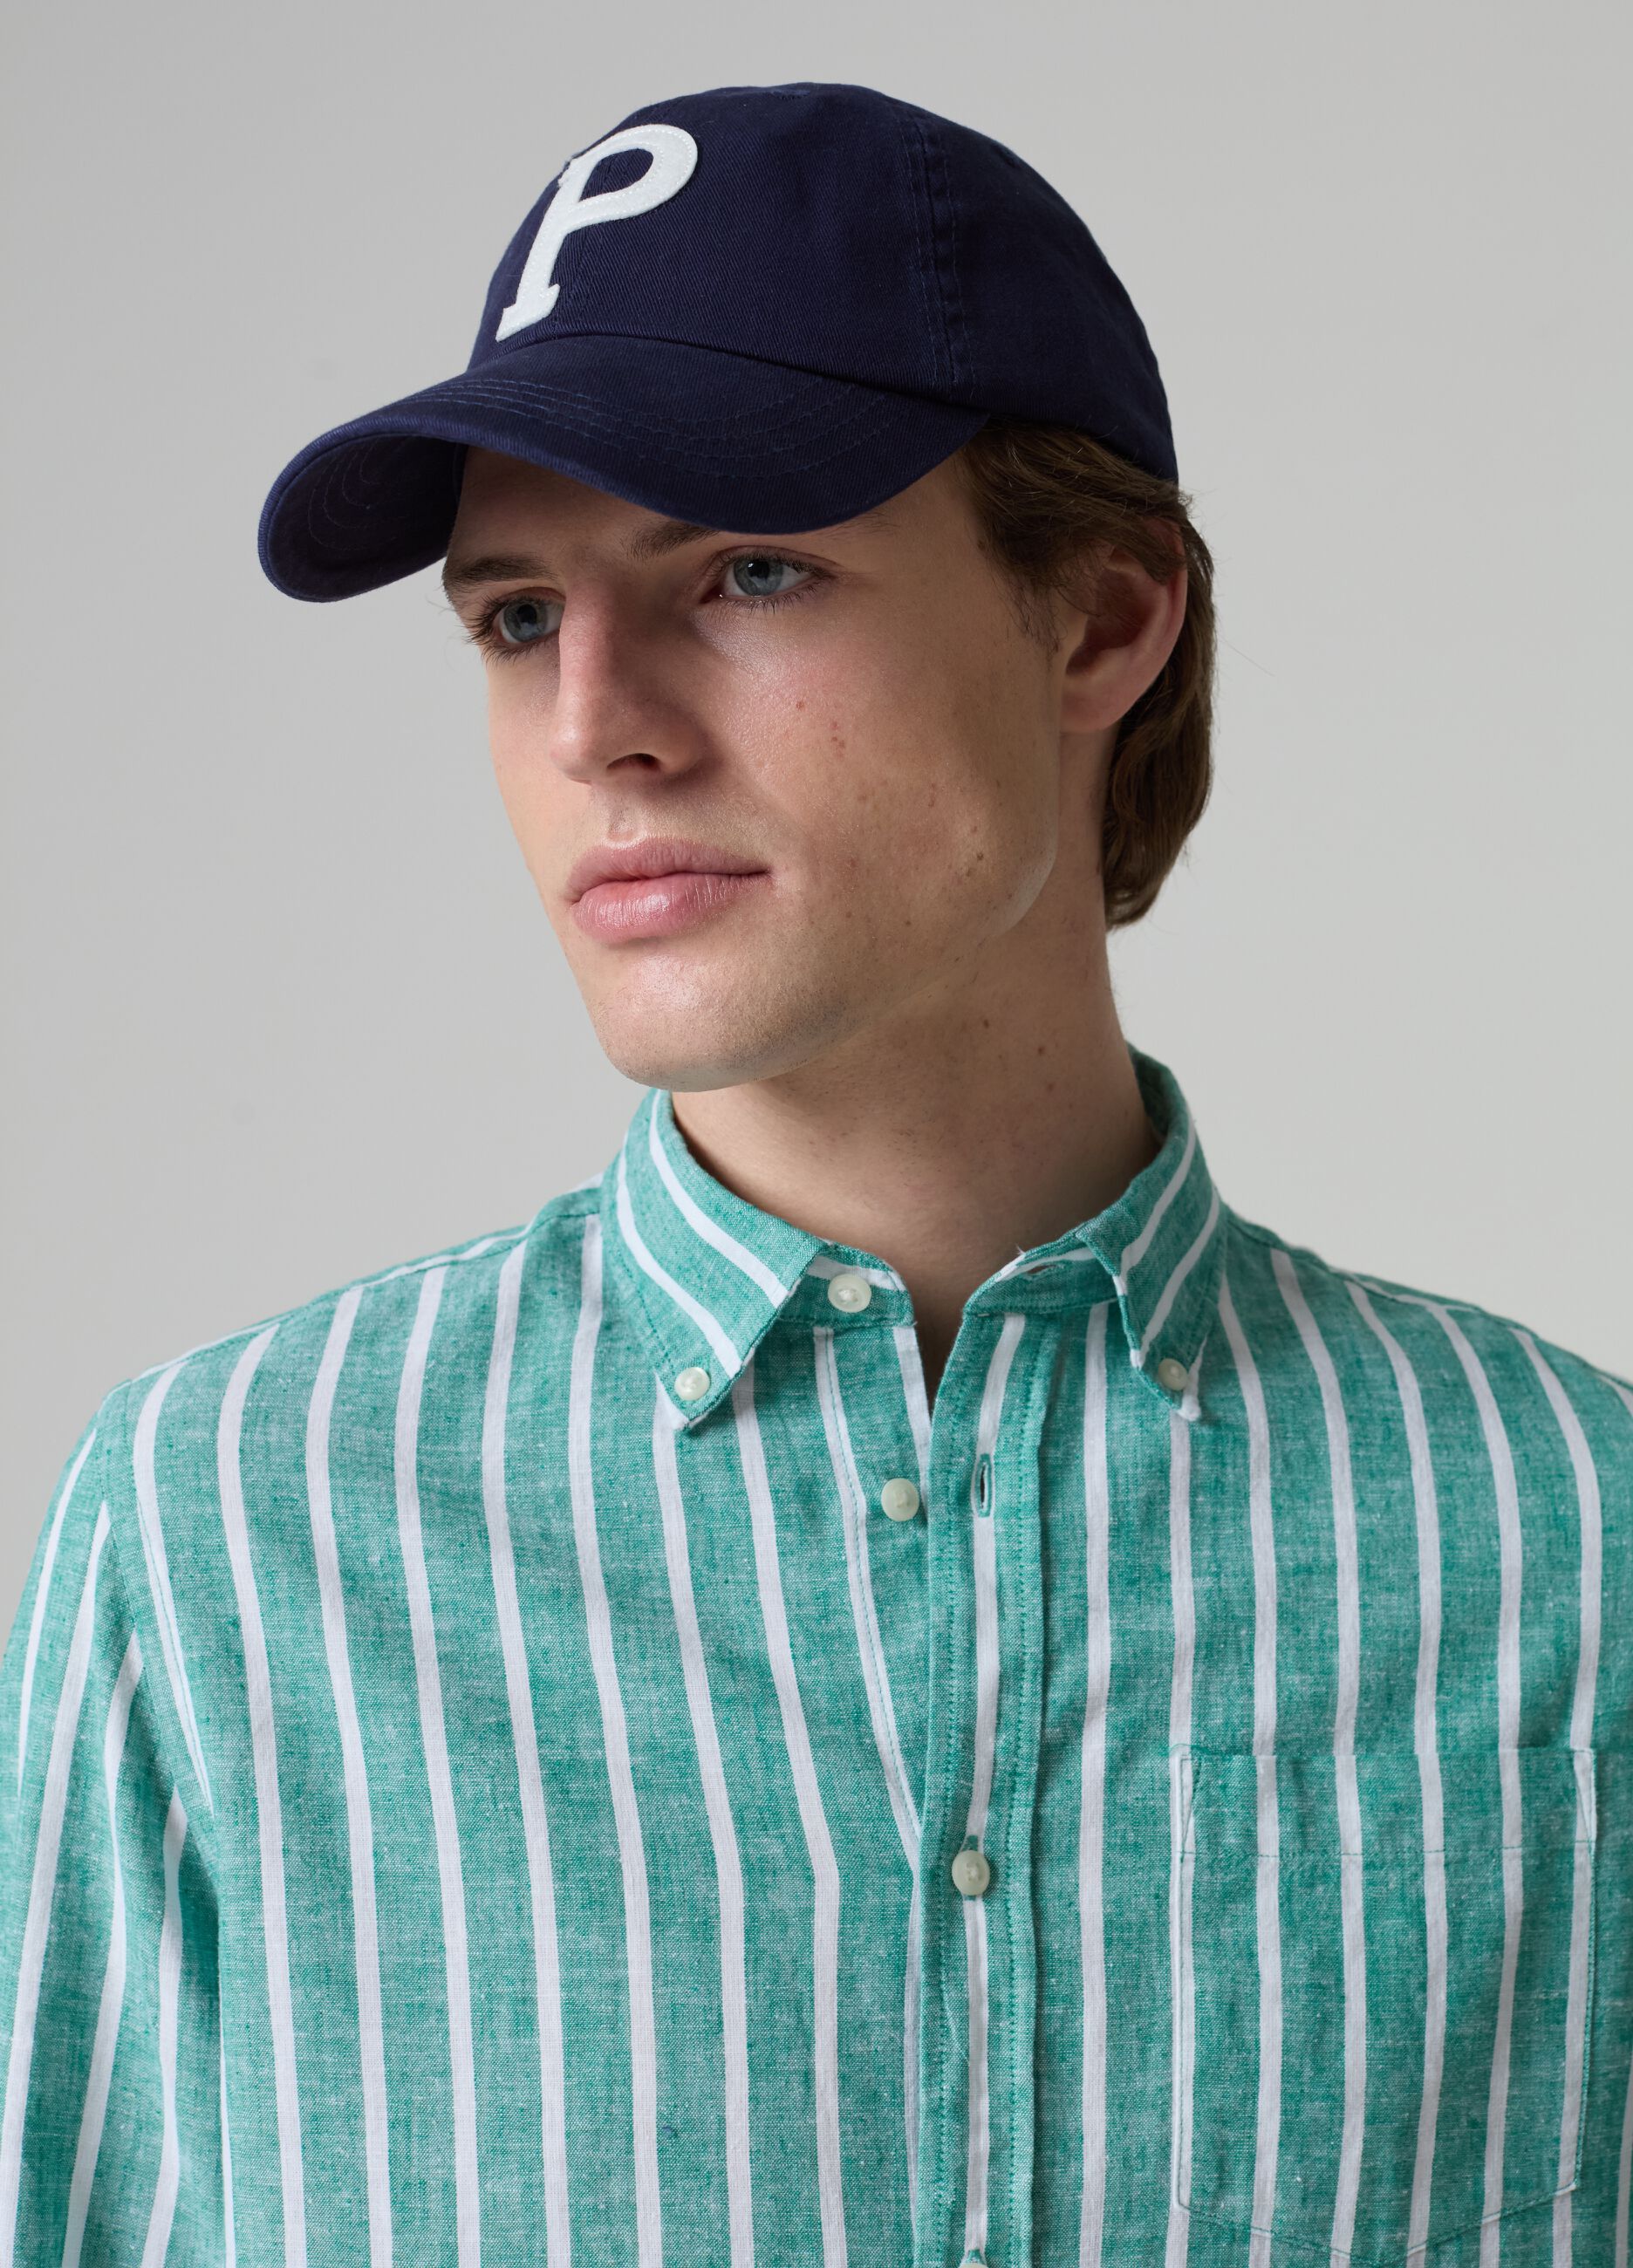 Stripe linen and cotton shirt with pocket